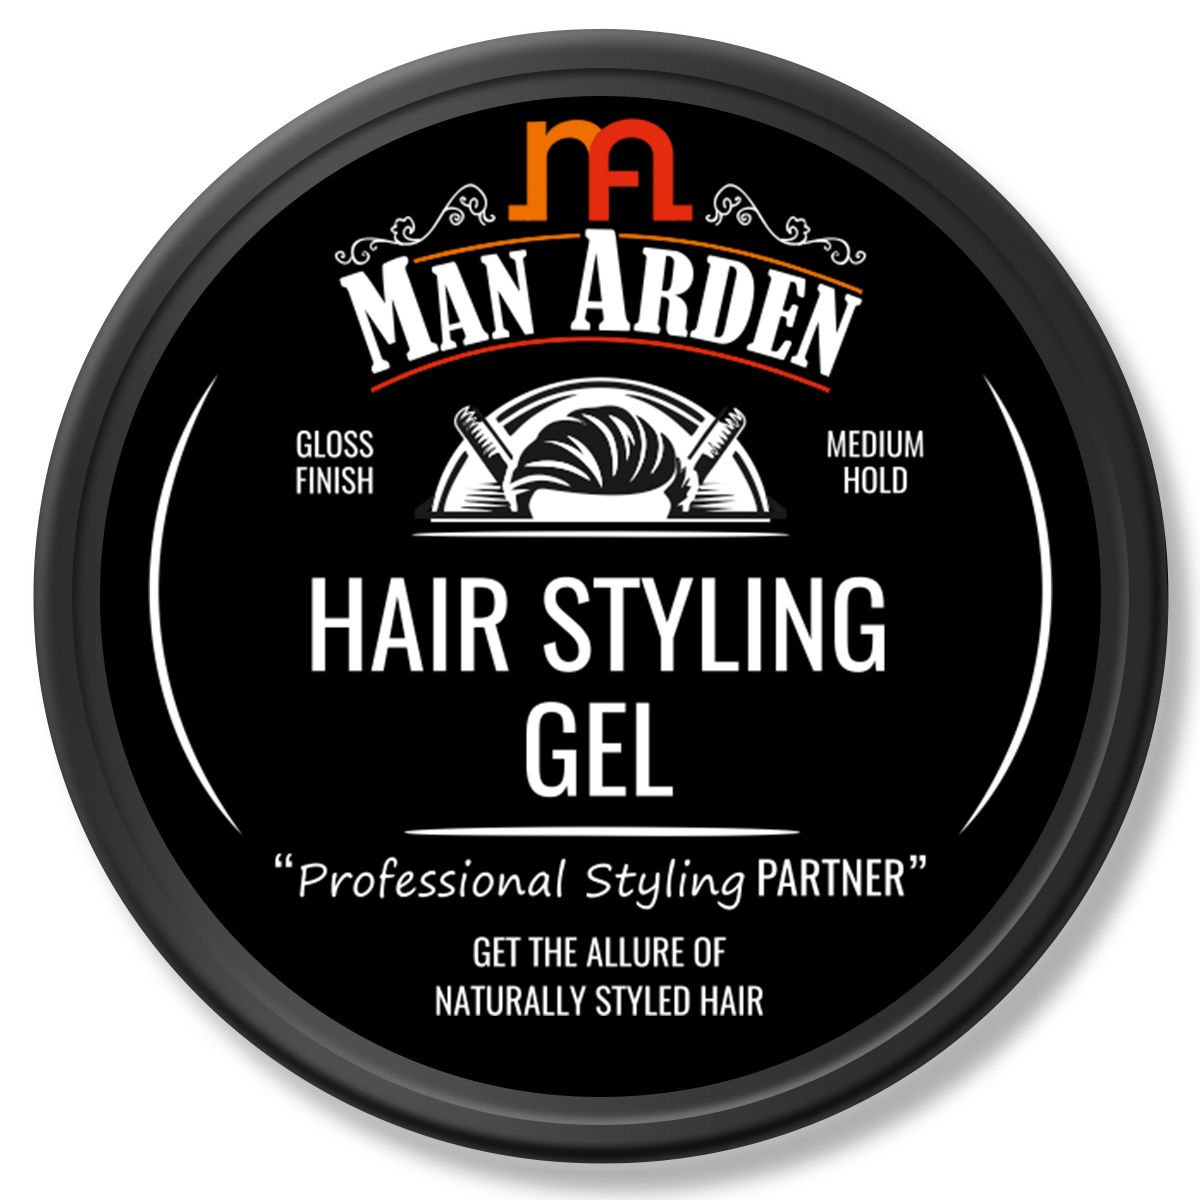 Man Arden Hair Styling Gel Professional Styling For Gloss Finish, Medium  Hold, Easy Wash Off, Anytime Re-Stylable (50 g)